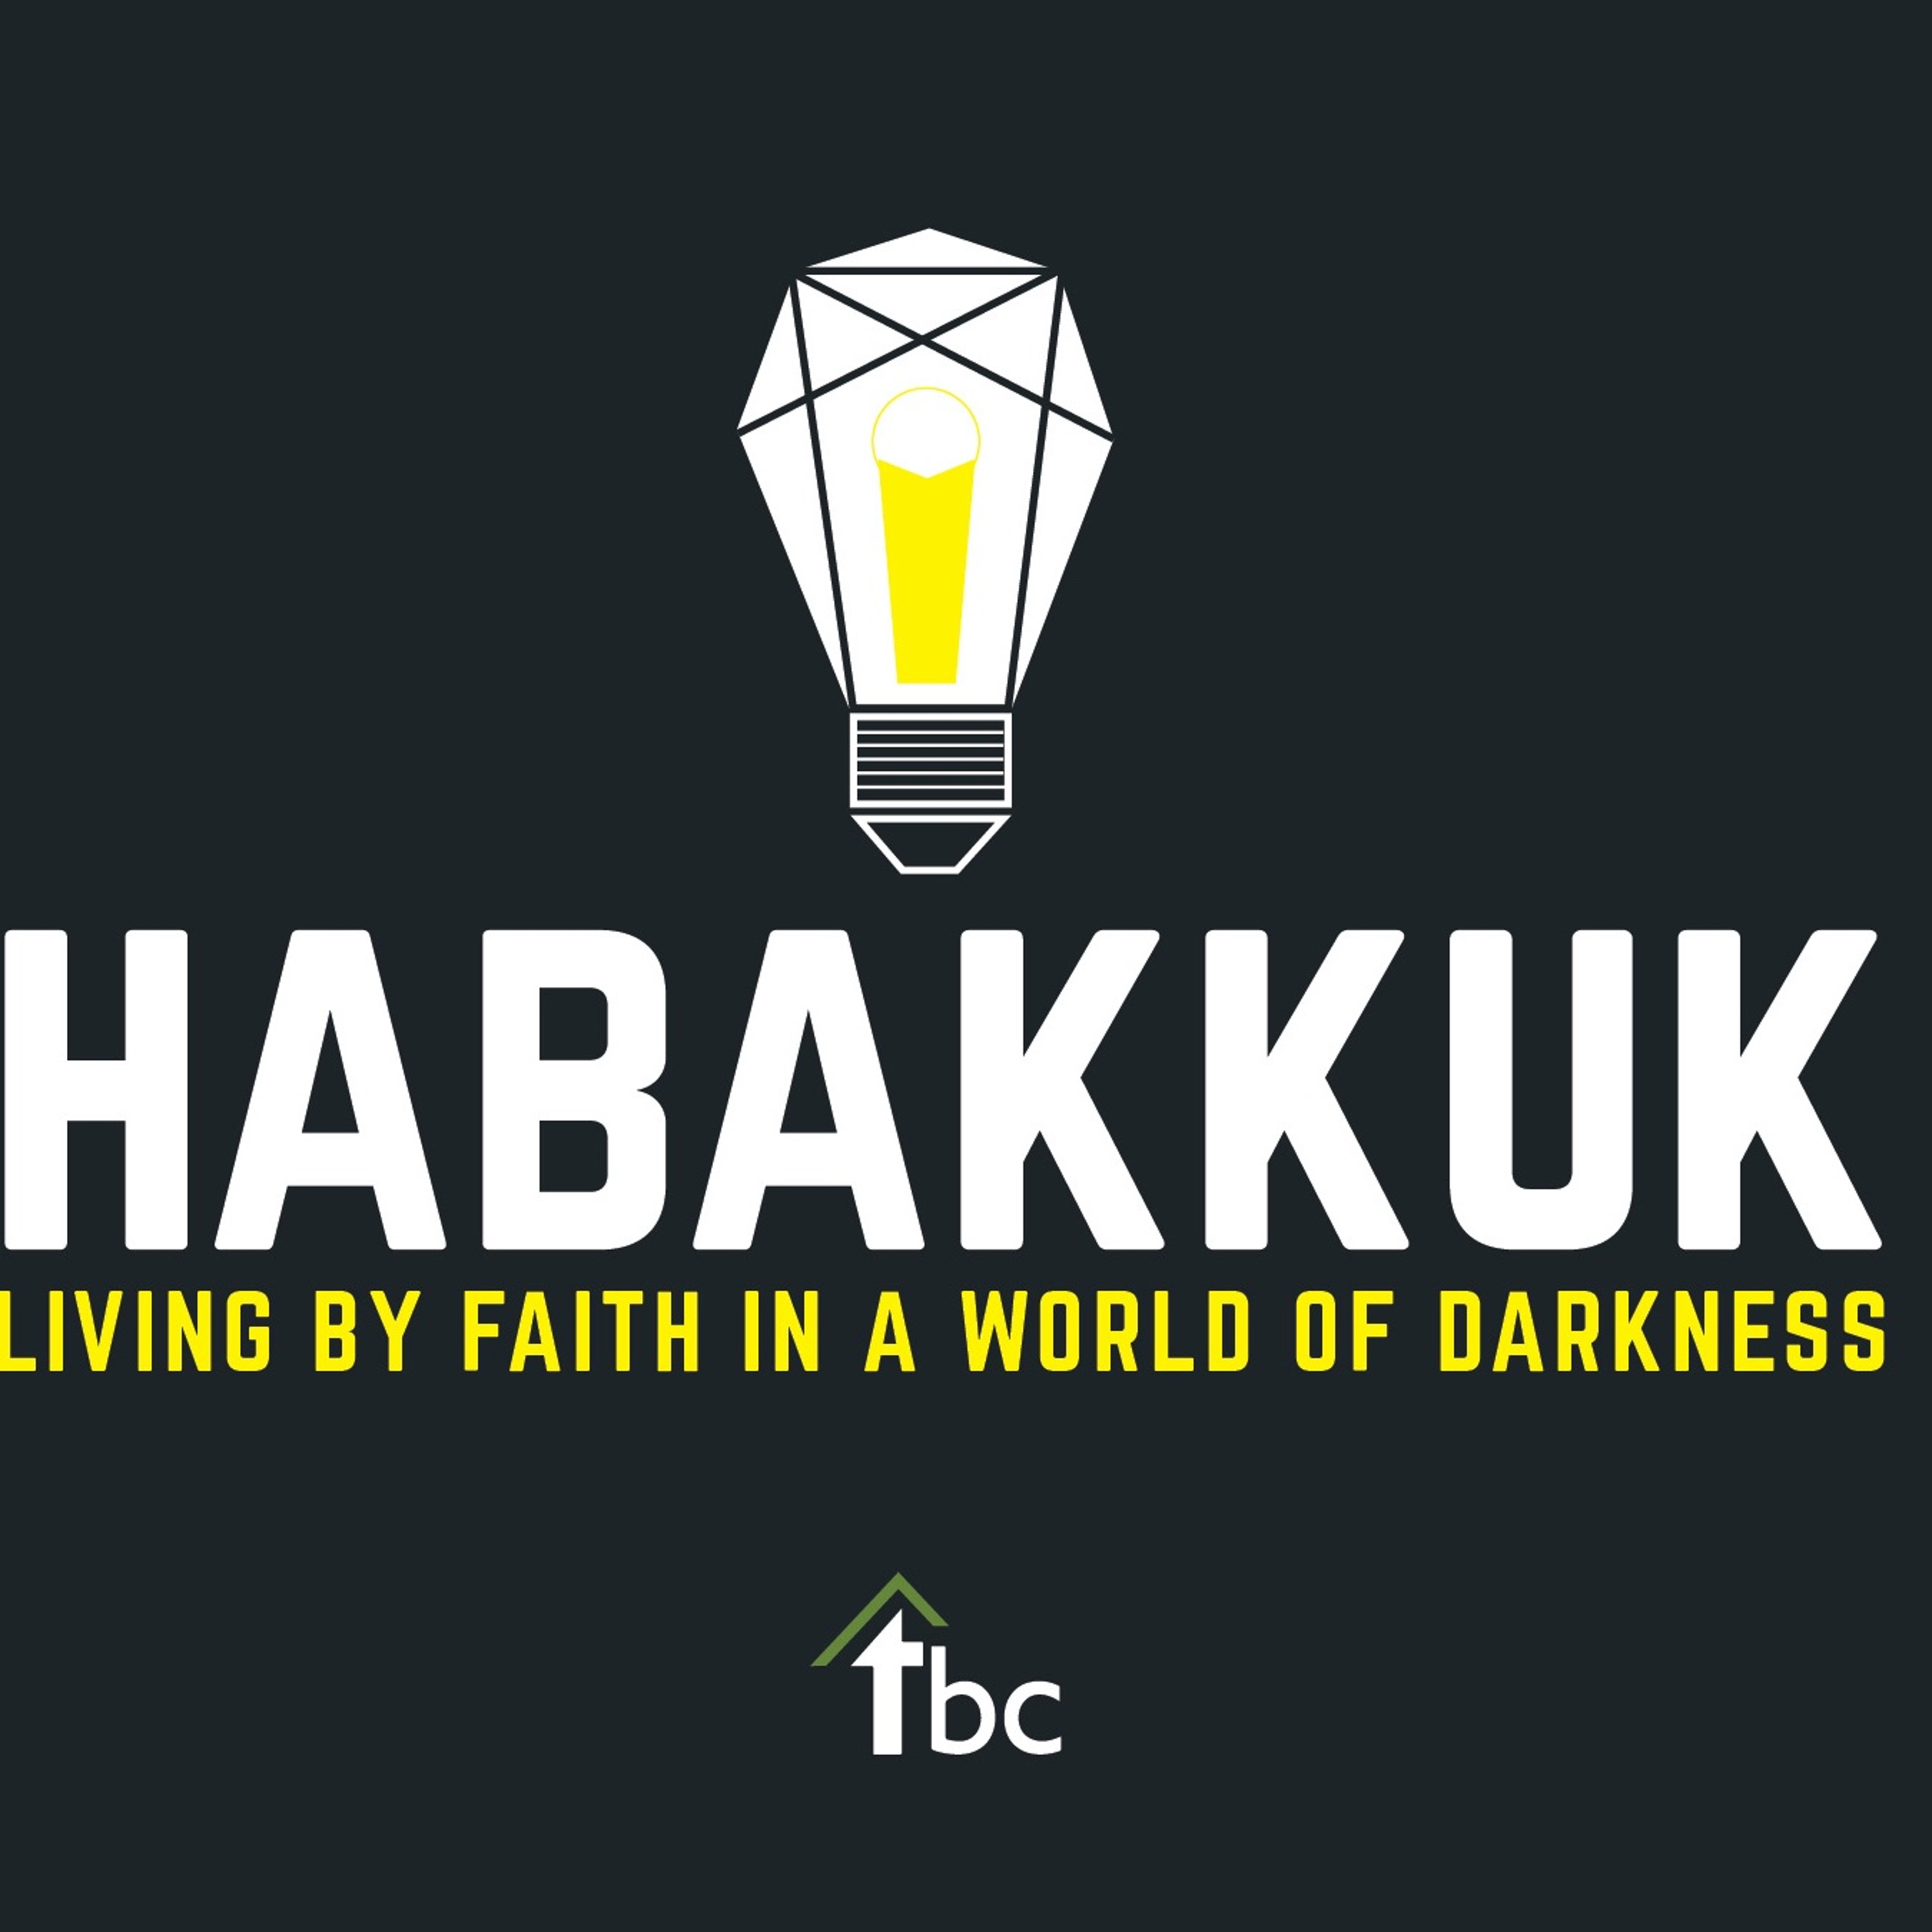 A Day Is Coming (Habakkuk 2:4-20)